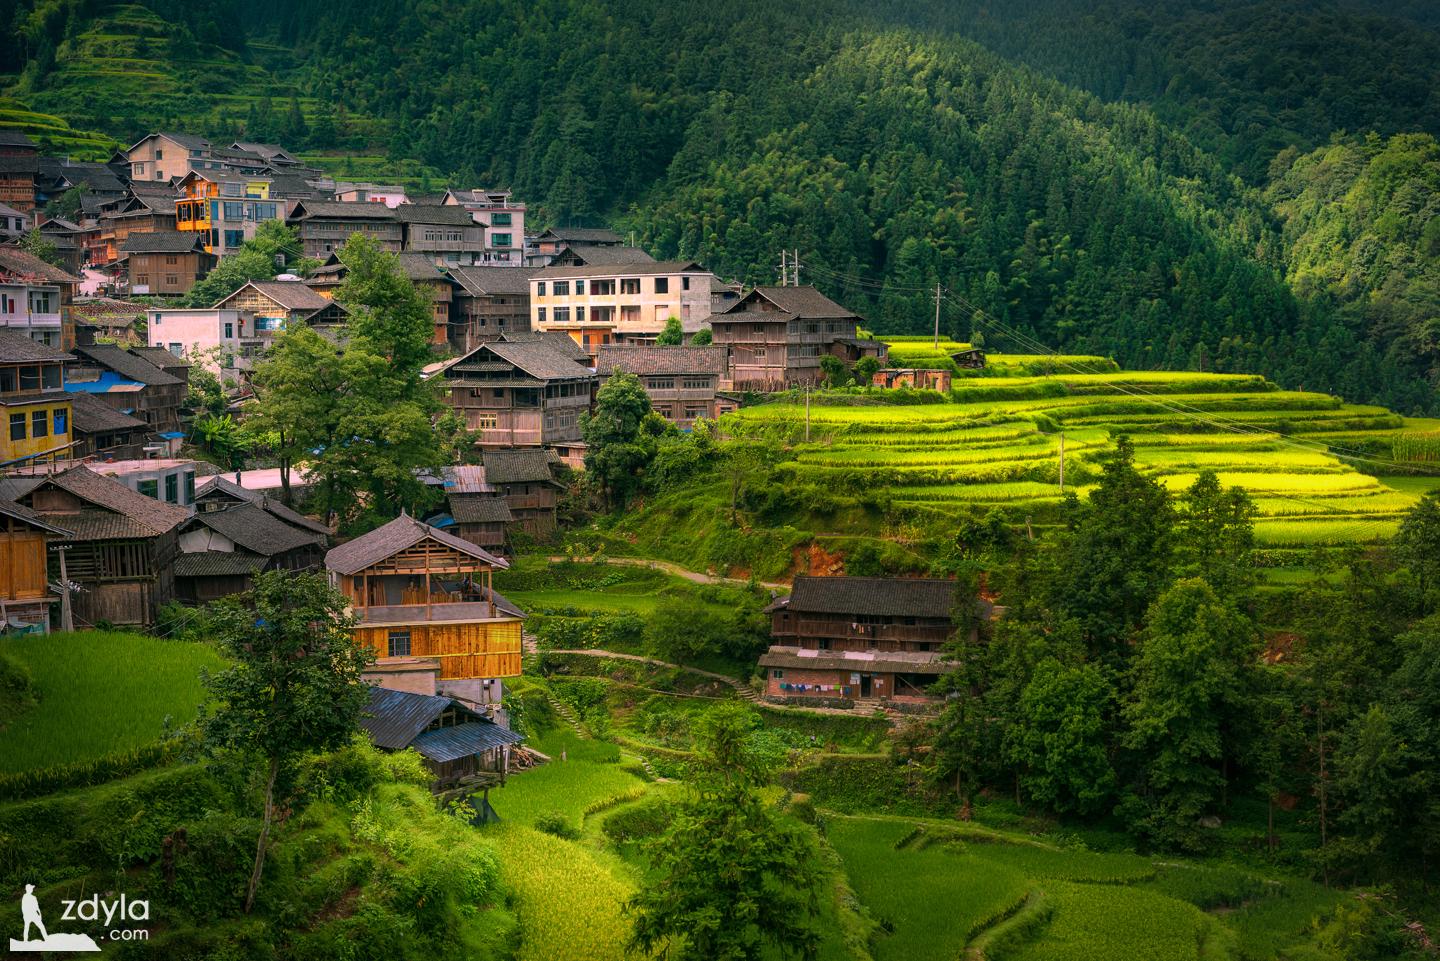 Ancient village in the mountains